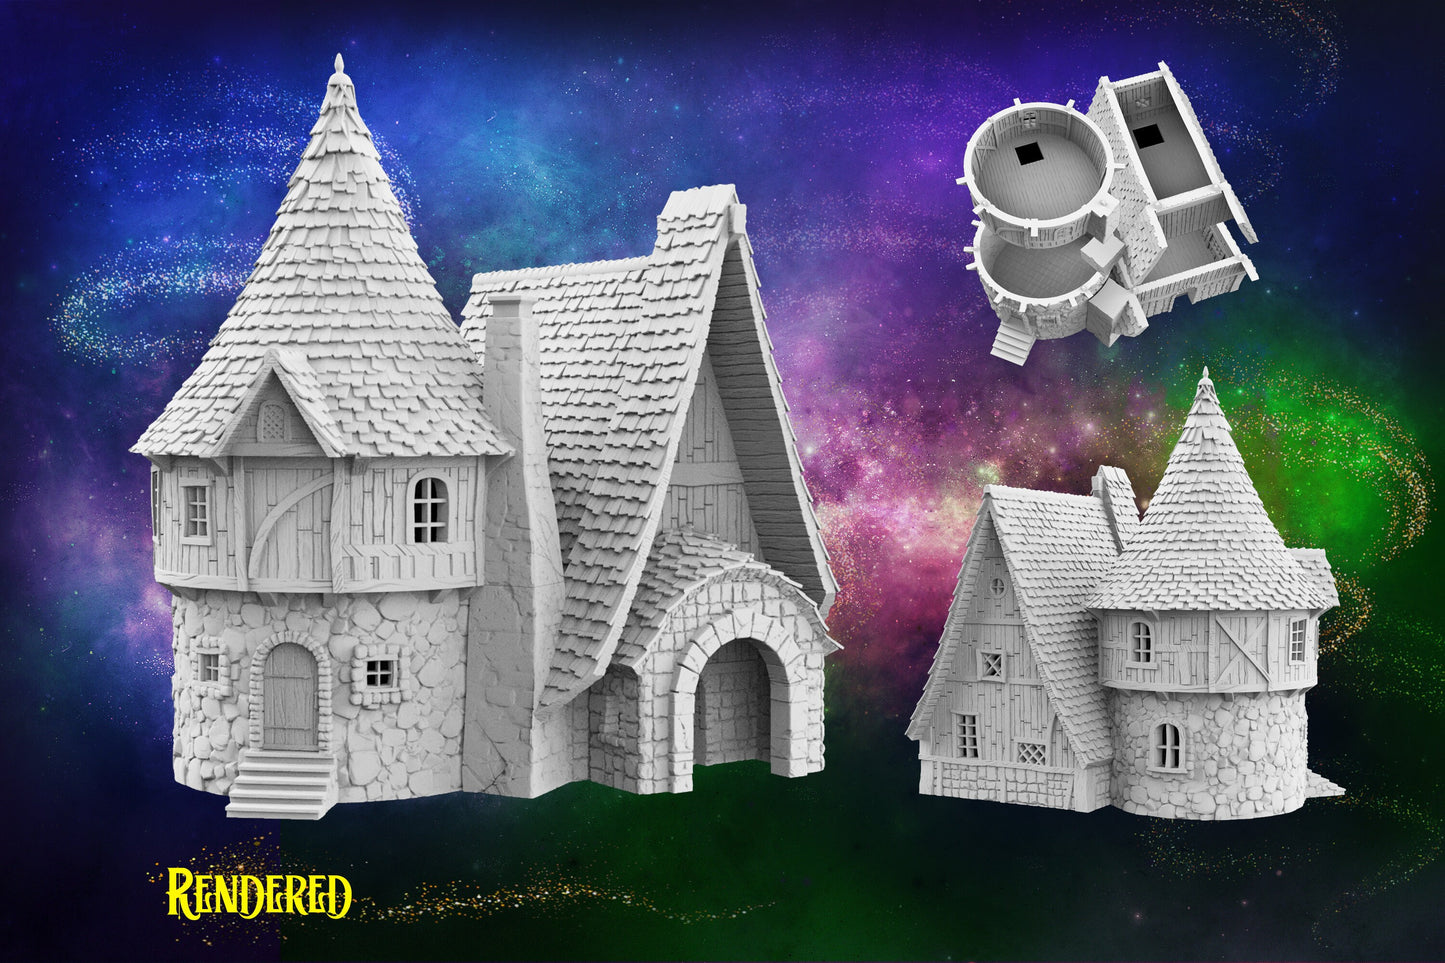 3D Printed 2 Storey Wizards Tower House with Playable interior for Dungeons and Dragons, Wargaming and Tabletop games.  DnD, Warhammer